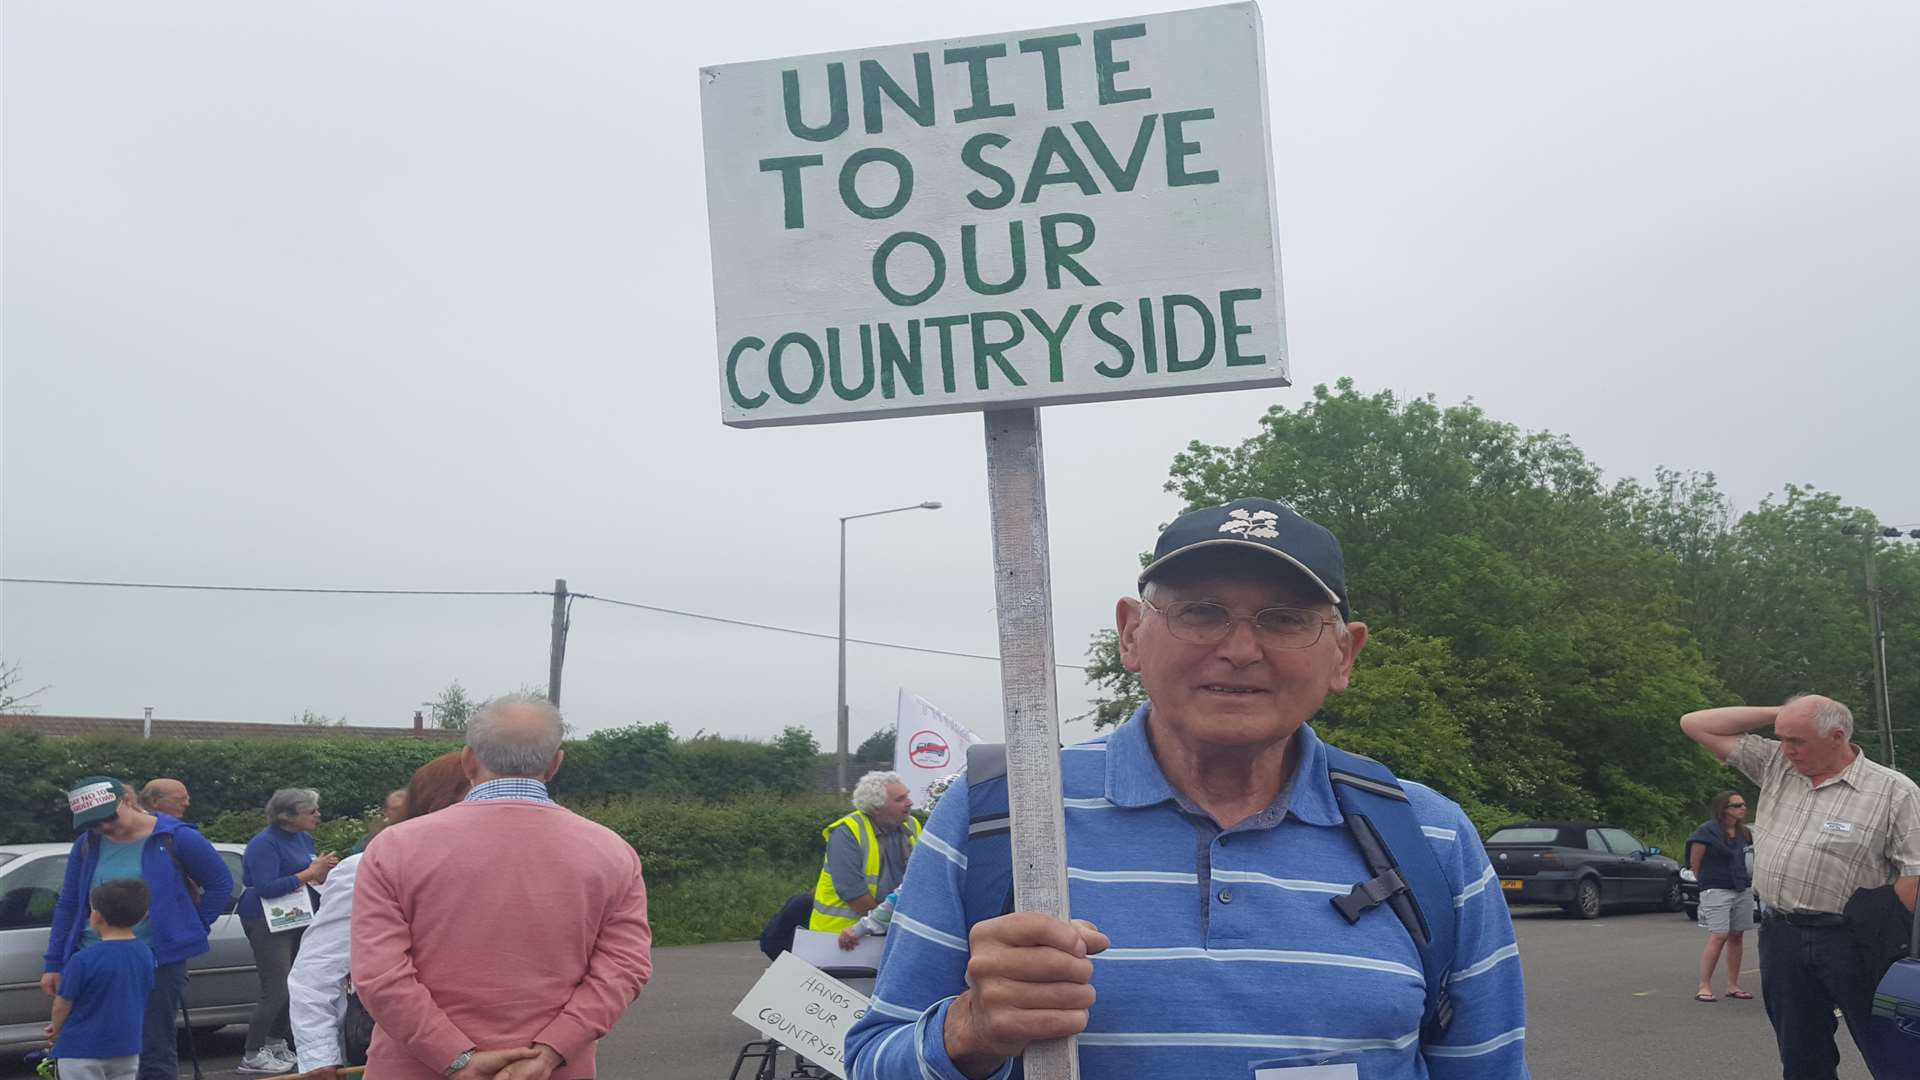 Bob Paddon joined the protests